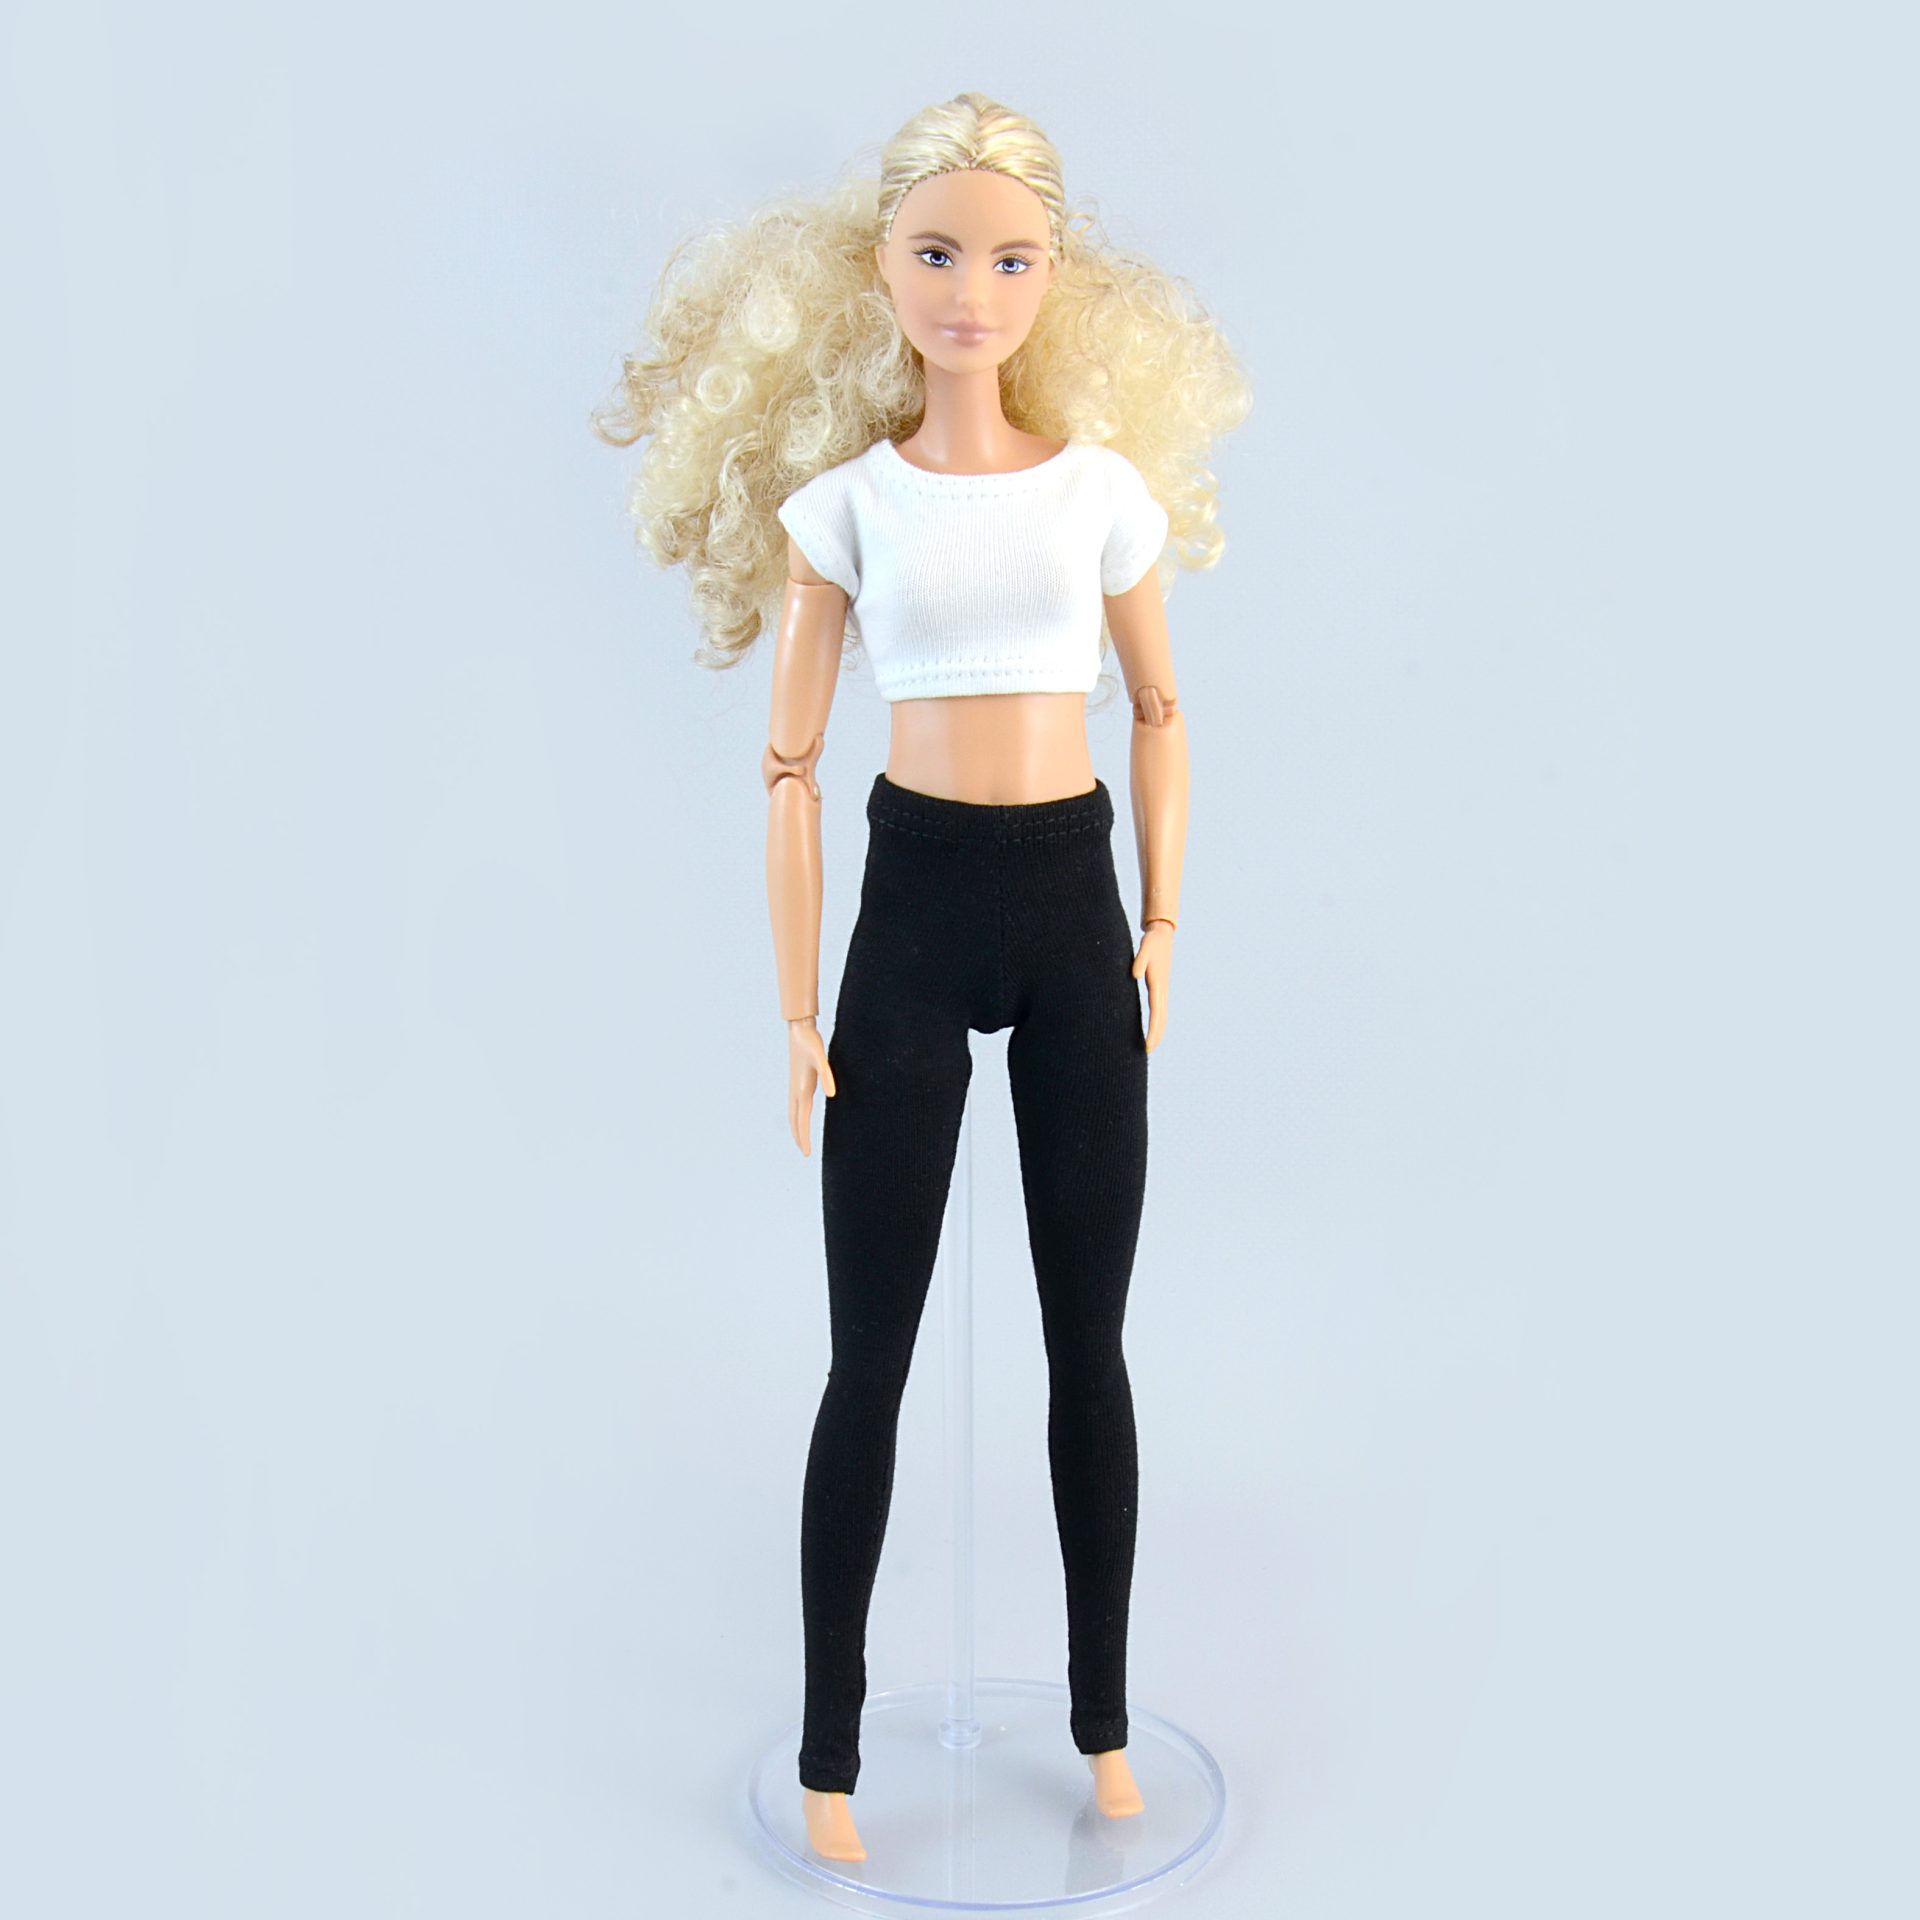 Stylish Swimsuit and Leggings for My Size Barbie Doll